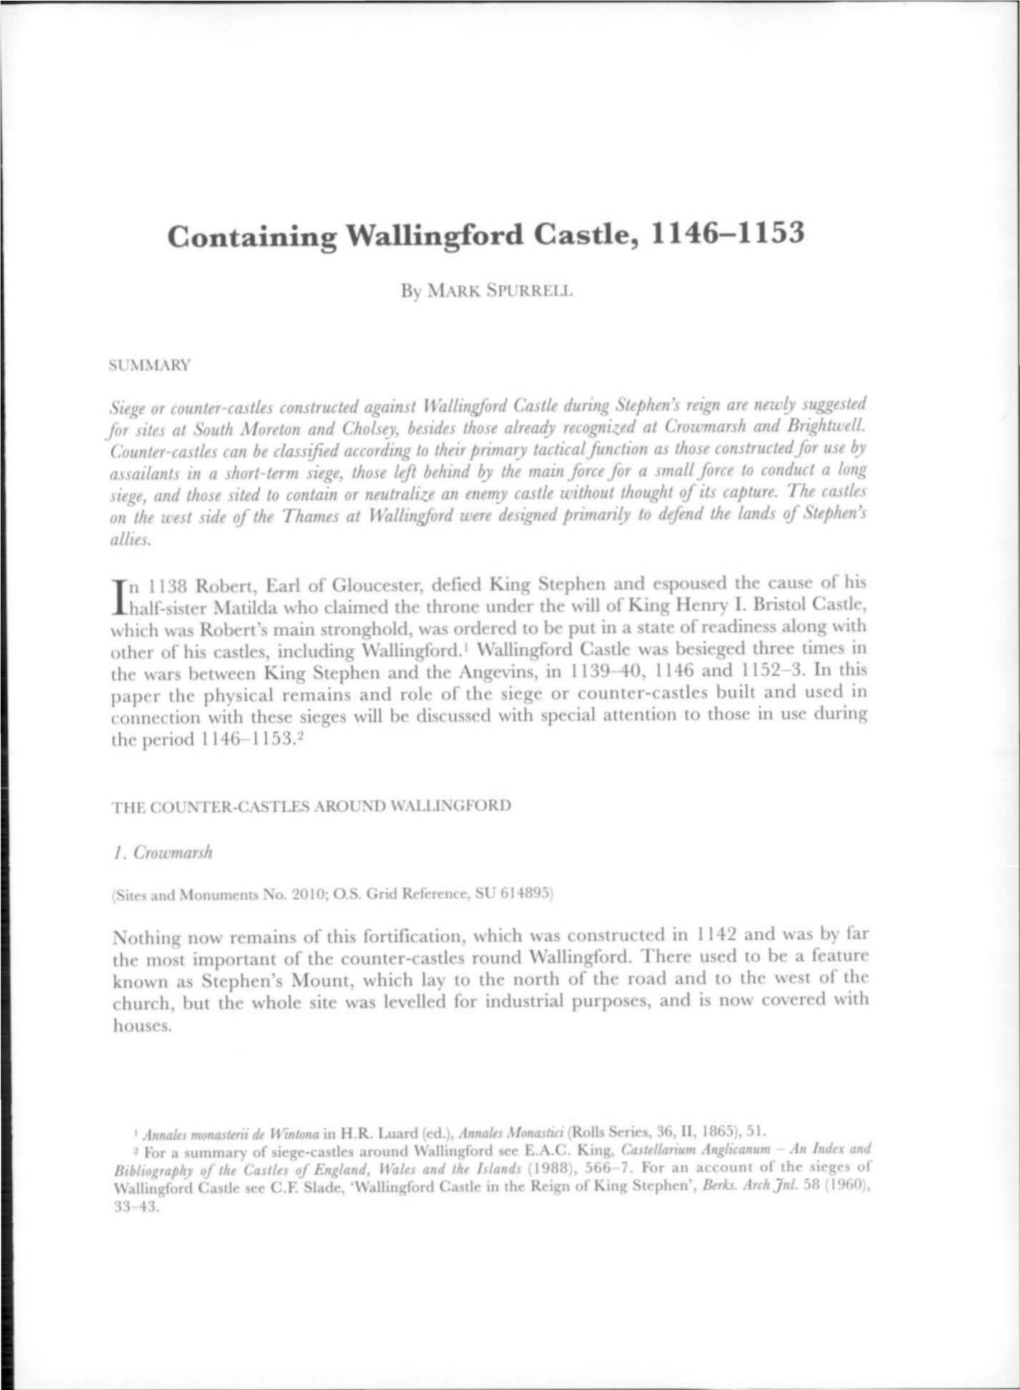 Containing Wallingford Castle, 1146-1153